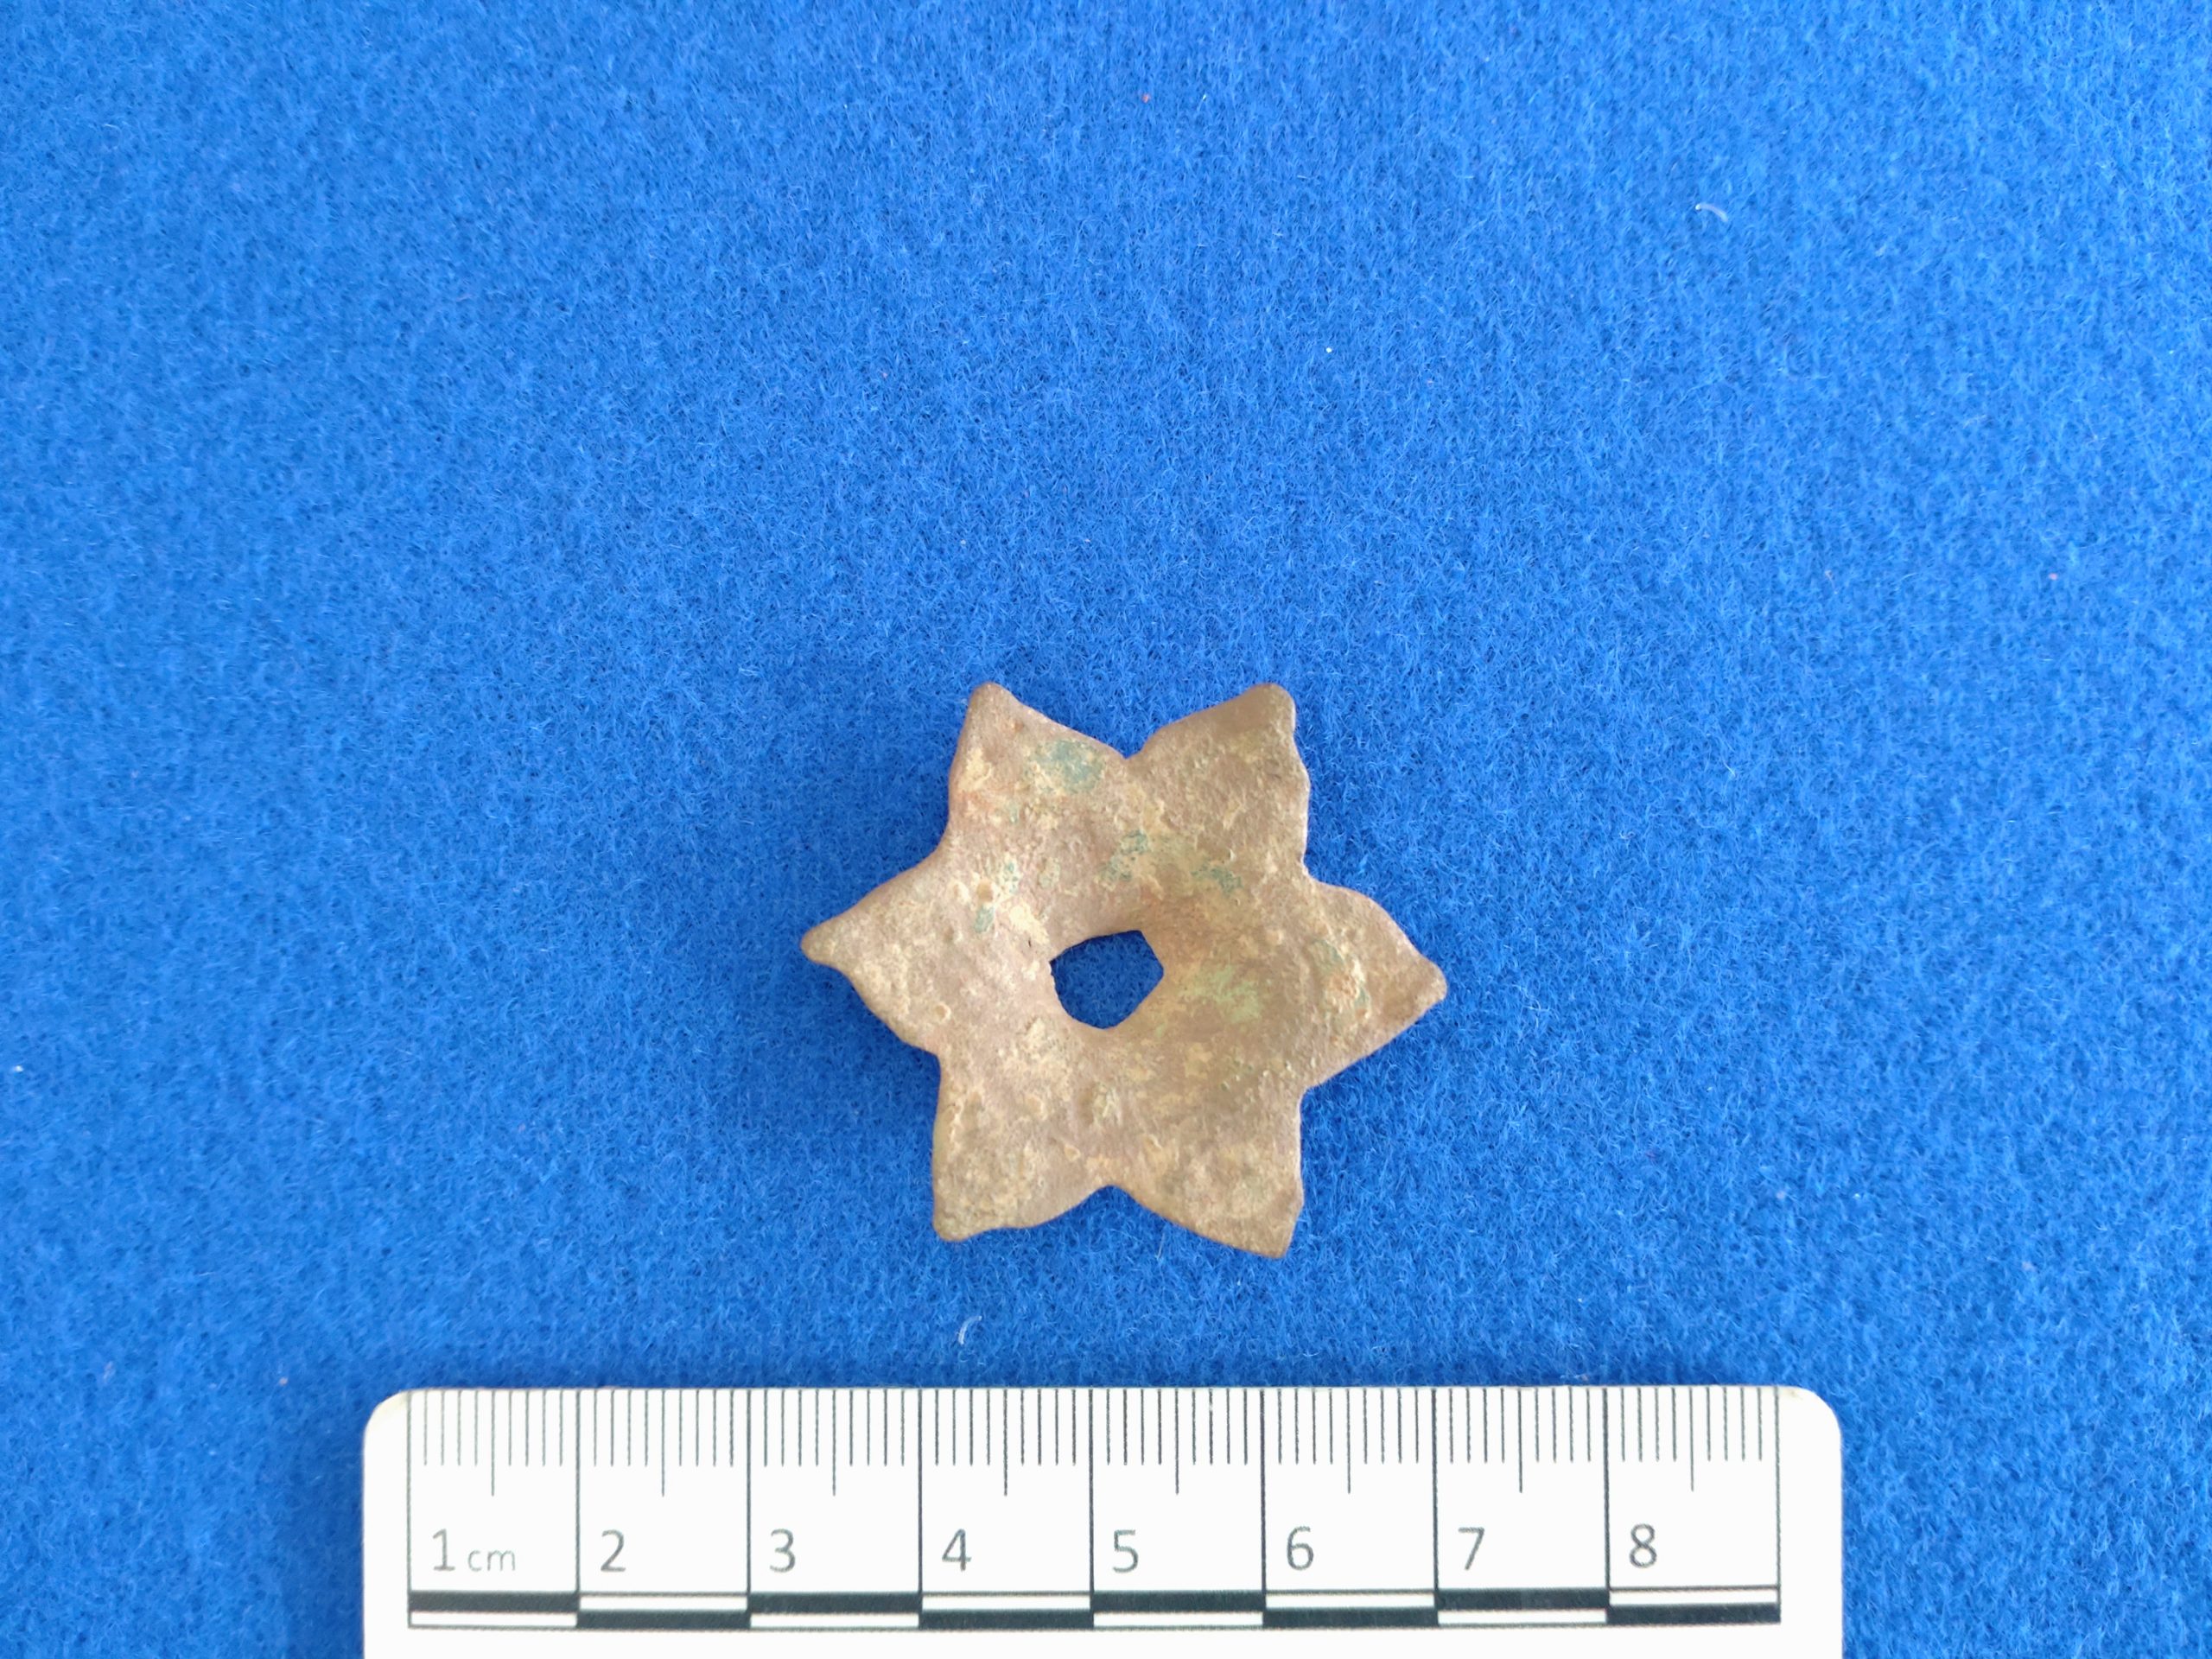 Copper alloy star-shaped spur